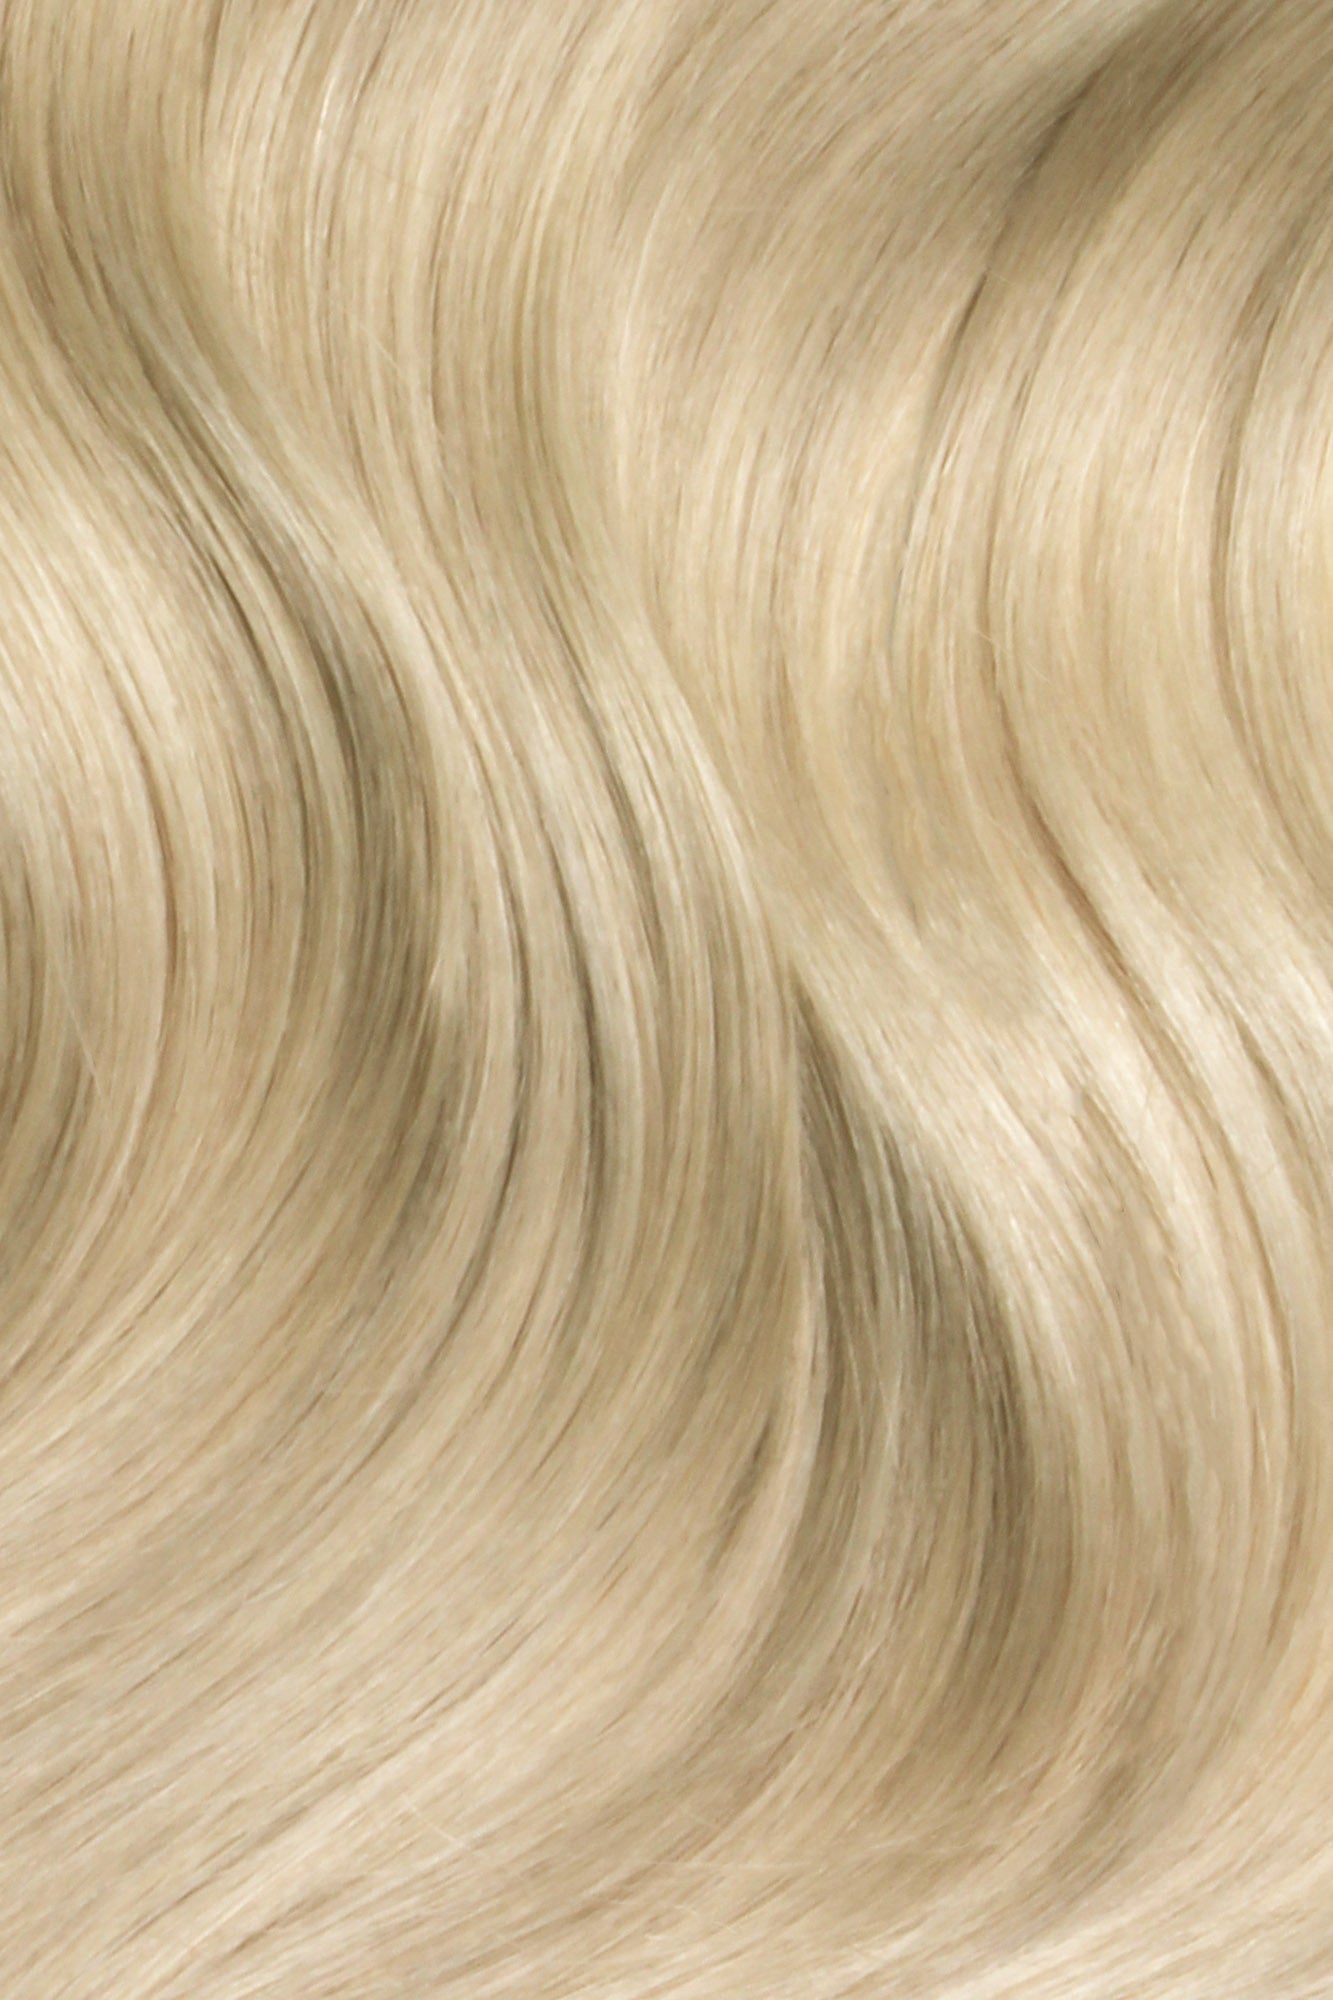 SEAMLESS® Flat Weft 20 Inches - SWAY Hair Extensions Hollywood-Ash-Blonde-18A-613A Natural SEAMLESS® Flat Weft 20 Inches extensions. Thin, flexible, and discreet. 100% Double Drawn Remy Human Hair. Versatile and reusable